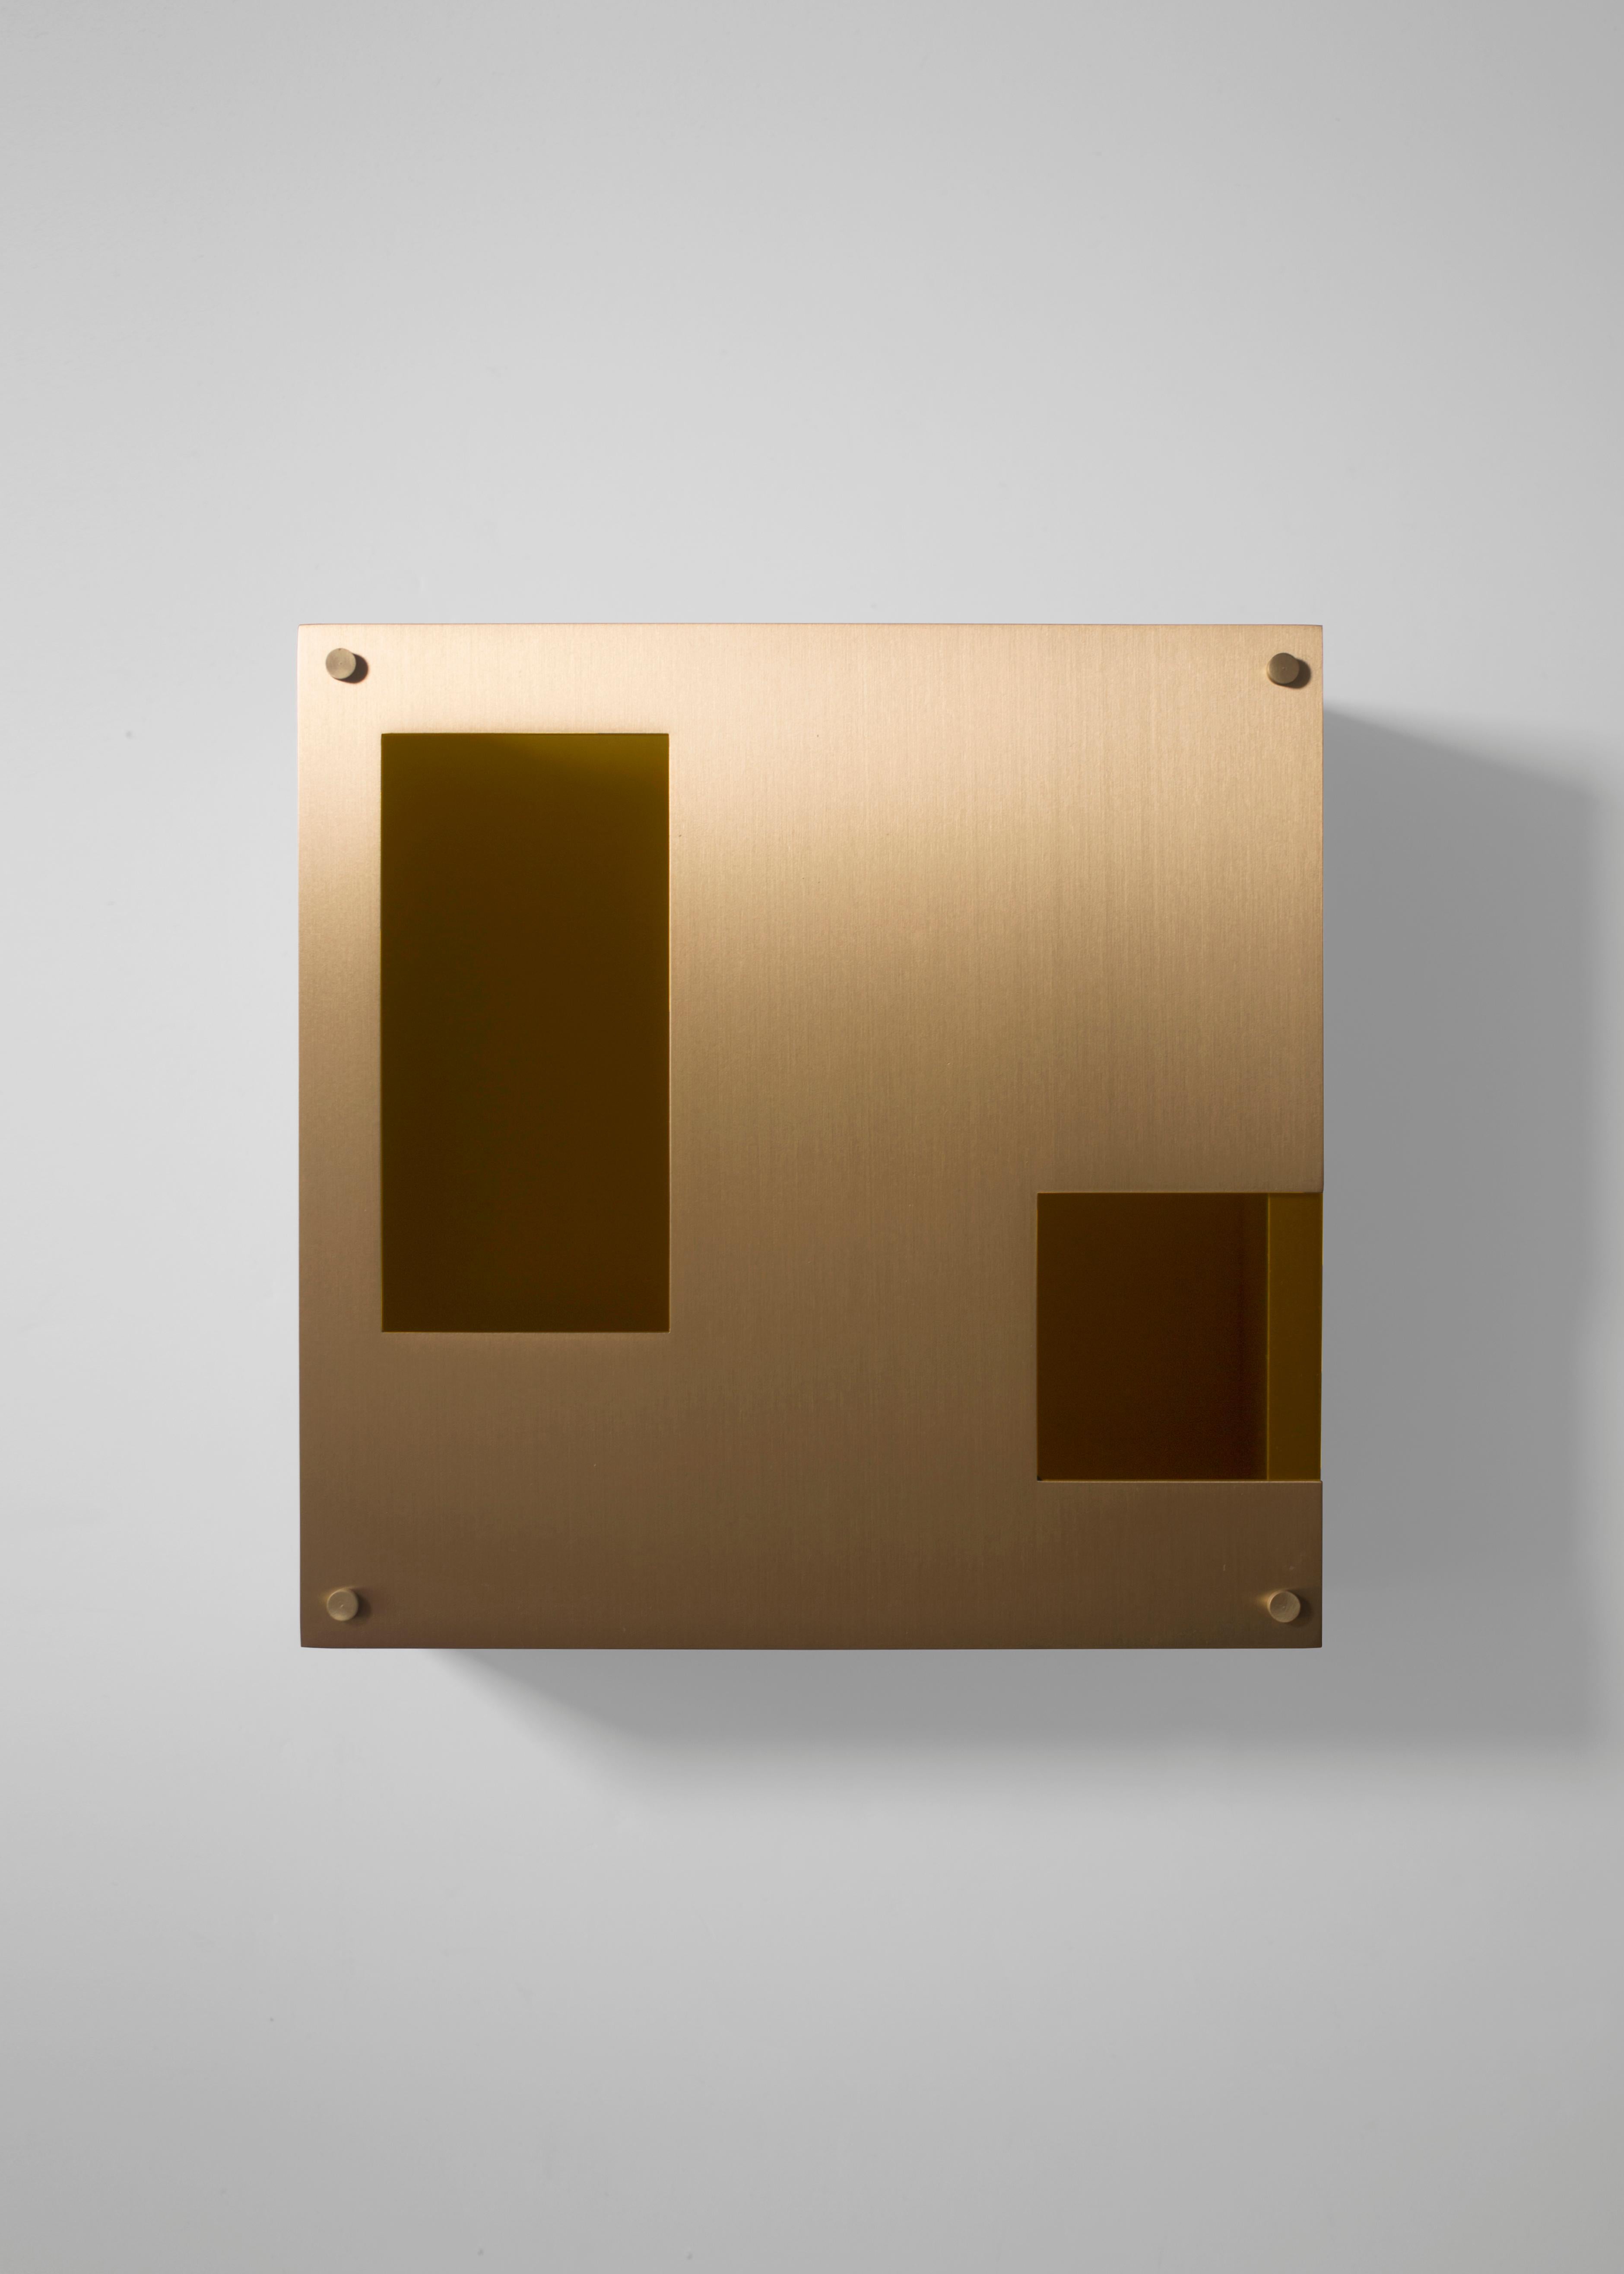 Orphan Work 001 Sconce, 2018
Shown in brushed brass
Available in brushed brass, brushed nickel and blackened brass
Monochrome or two-toned
Measures: 9”H x 9”W x 3 3/8”D
Wall or ceiling mount. 
Plug-in by request
UL approved
Holds (1) 60W candelabra